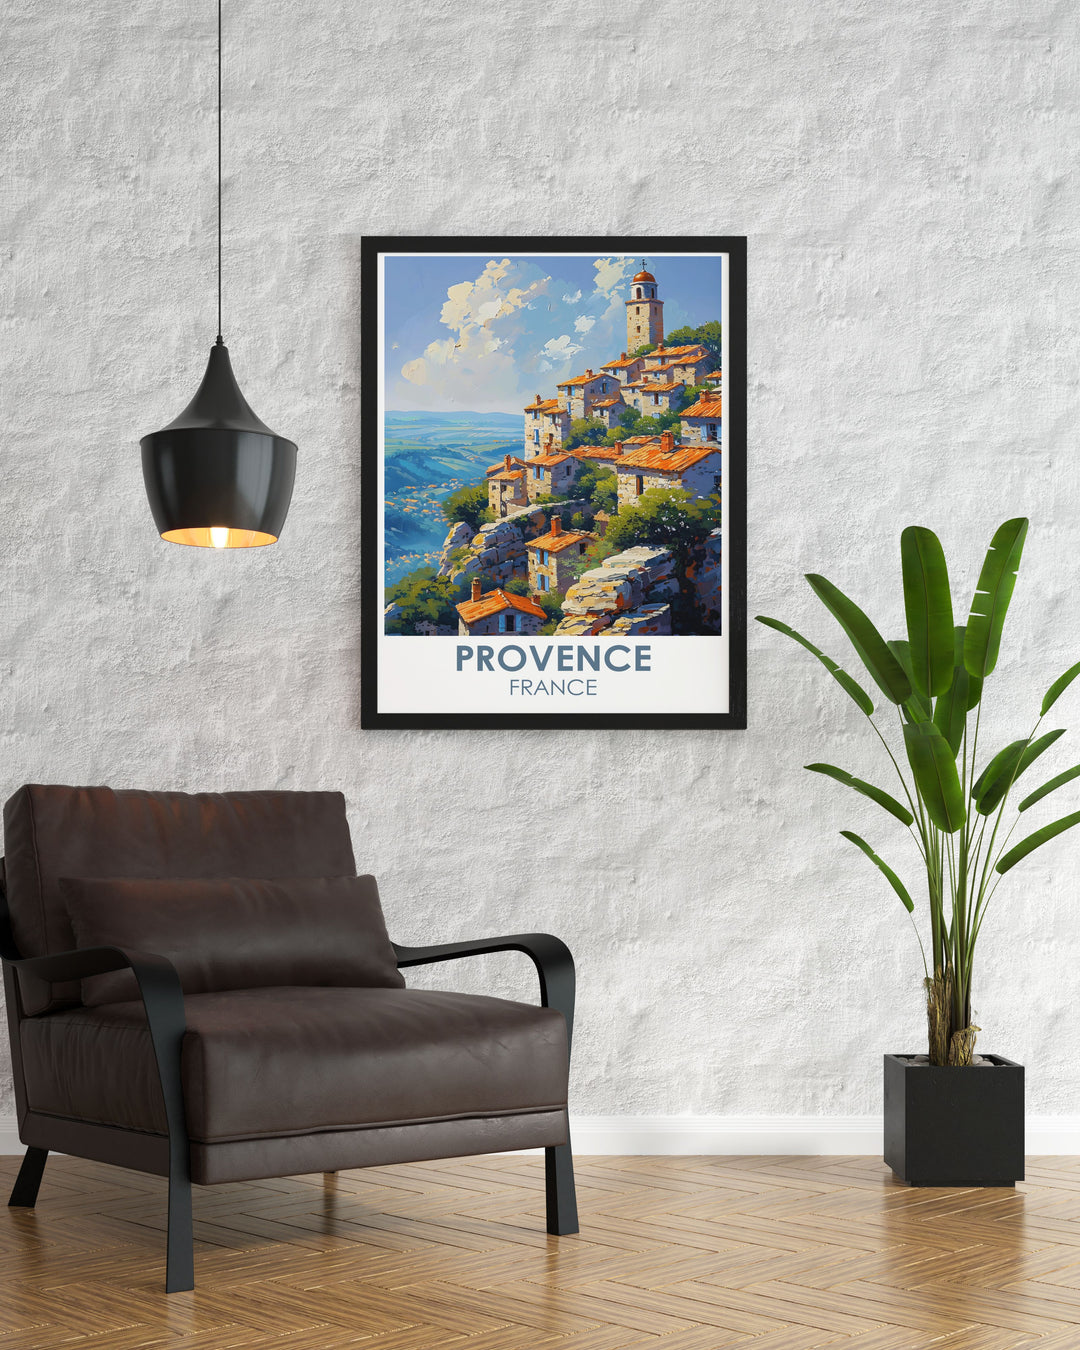 Explore the historical significance of Gordes through this exquisite travel poster, highlighting the medieval castle and the ancient architecture of this iconic village.